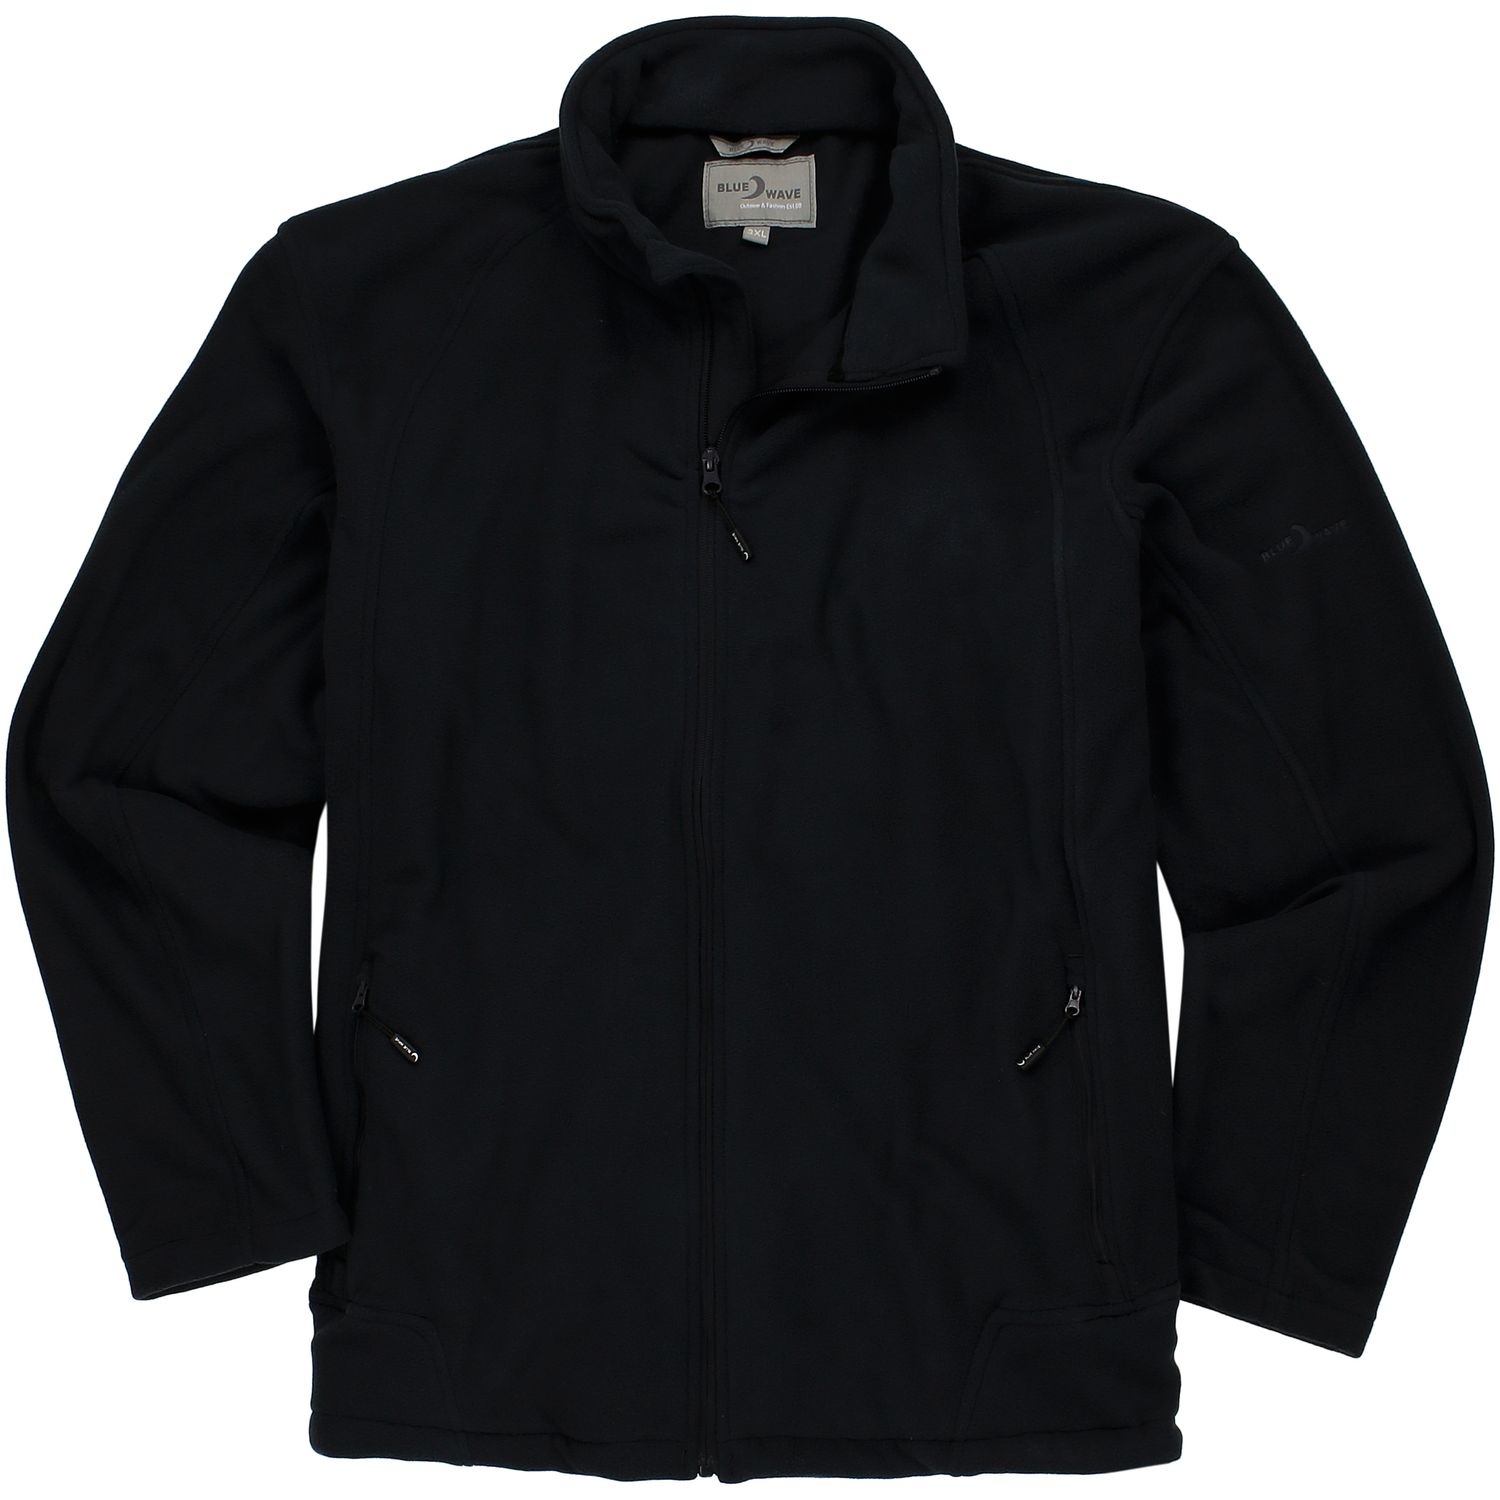 Fleece jacket "Henry" in black by Blue Wave up to oversize 8XL